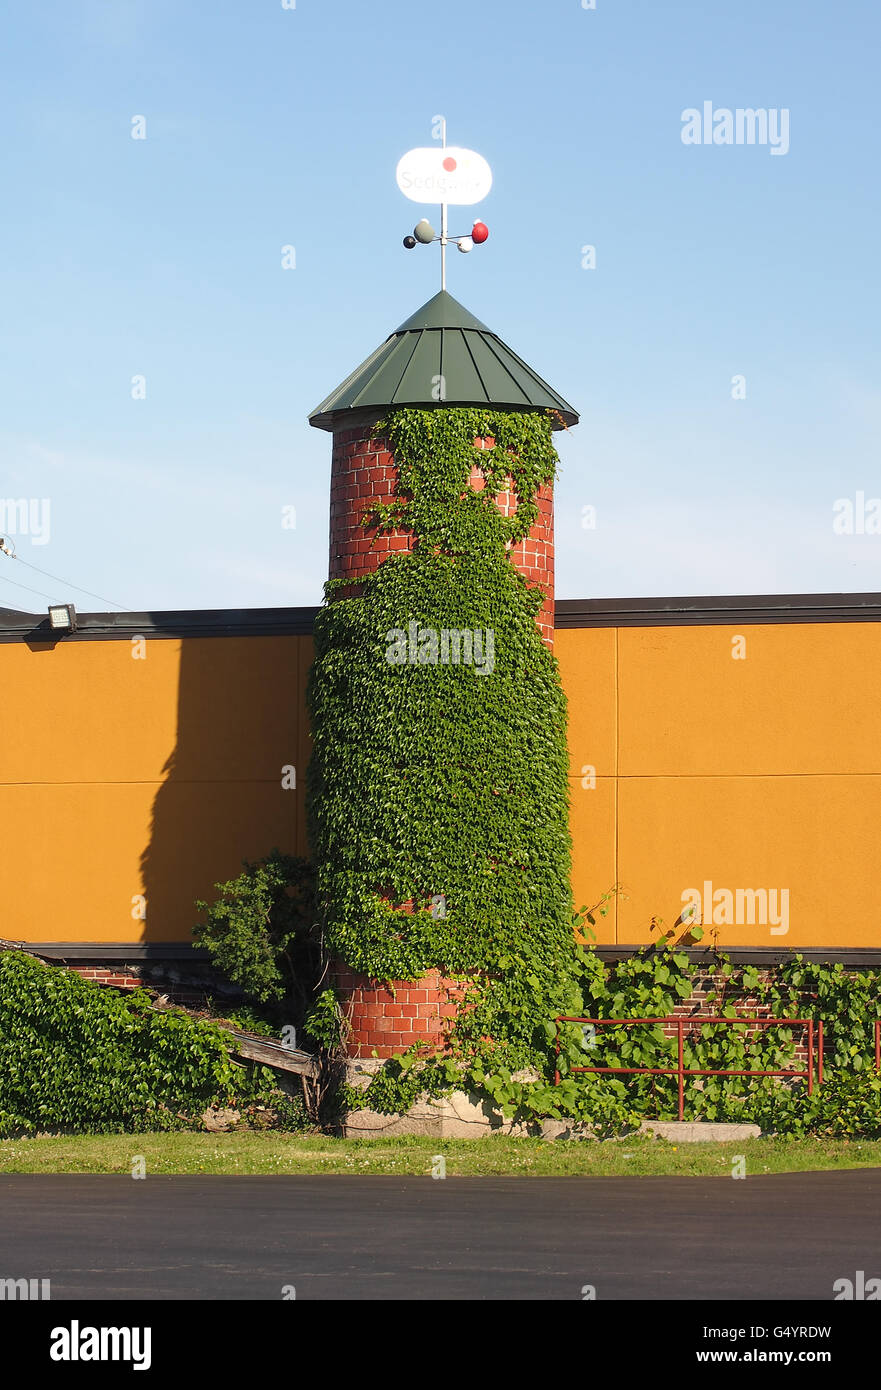 decorative turret covered in ivy Stock Photo